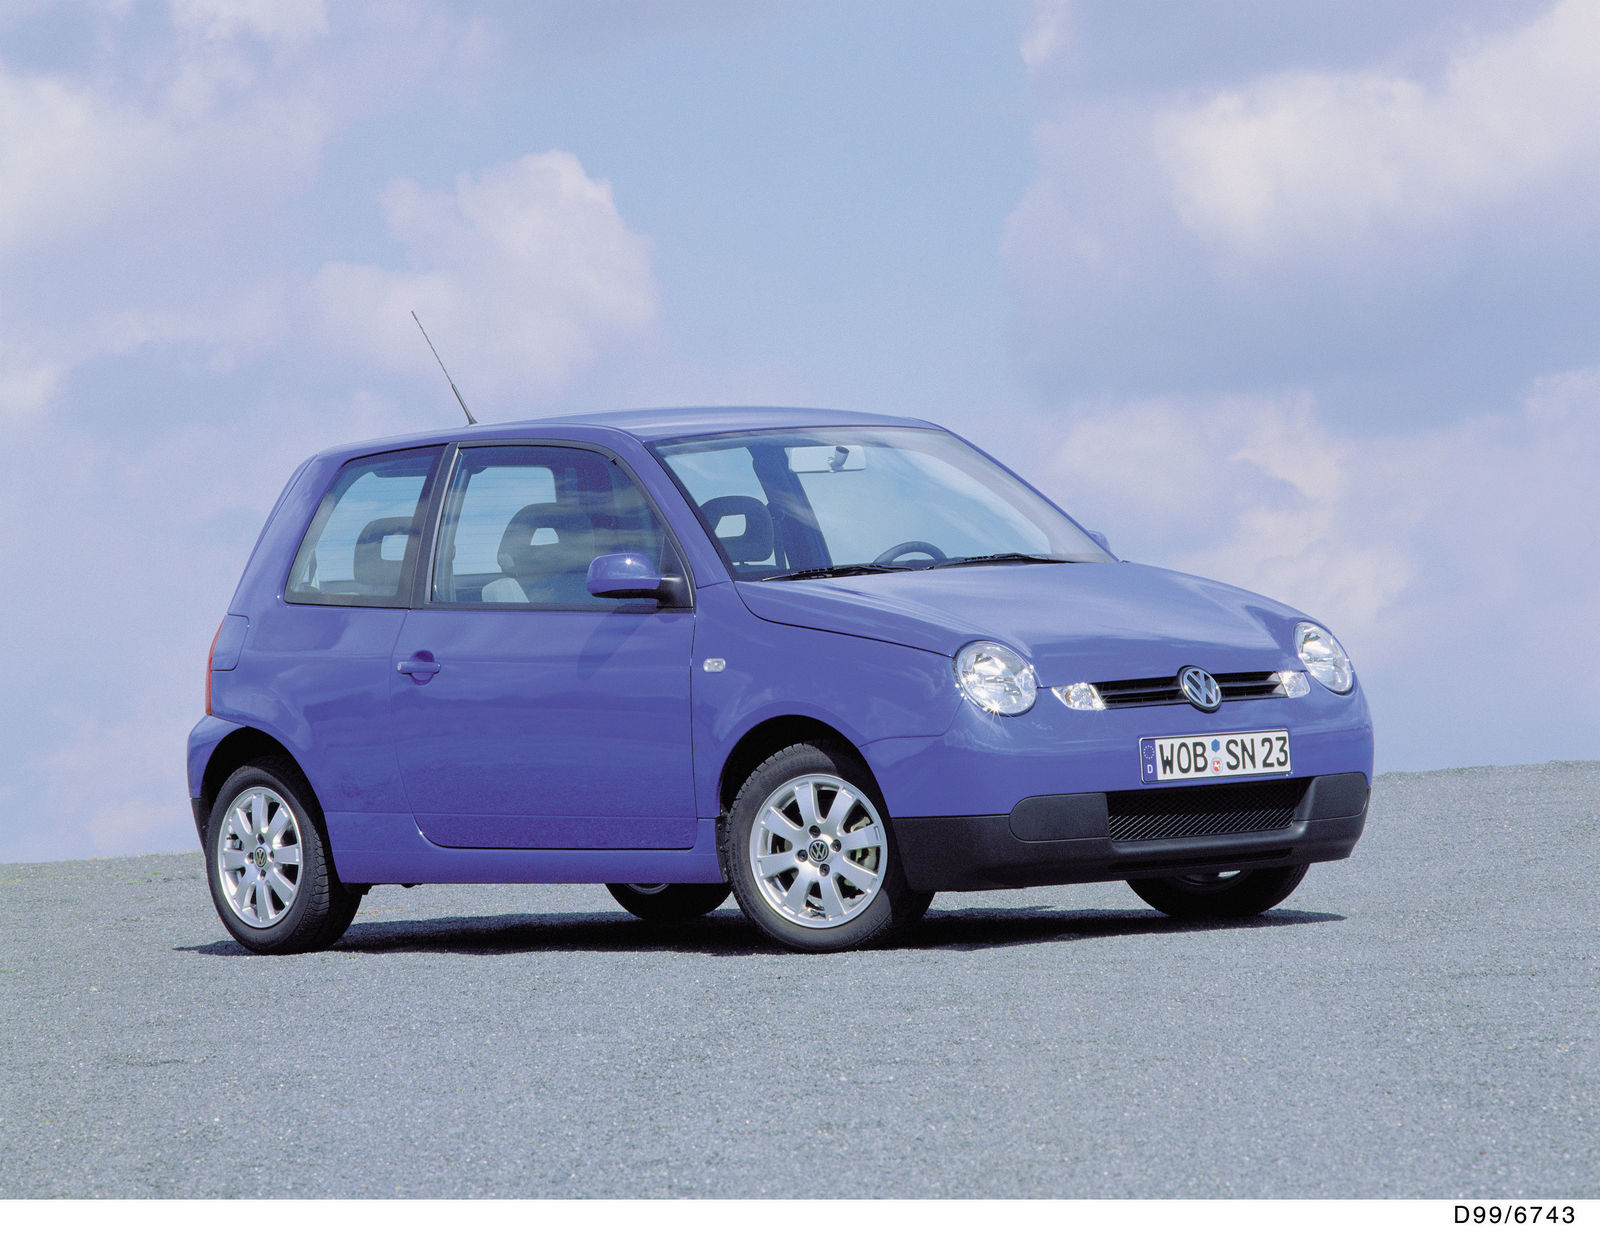 Volkswagen Lupo - Simple English Wikipedia, the free encyclopedia